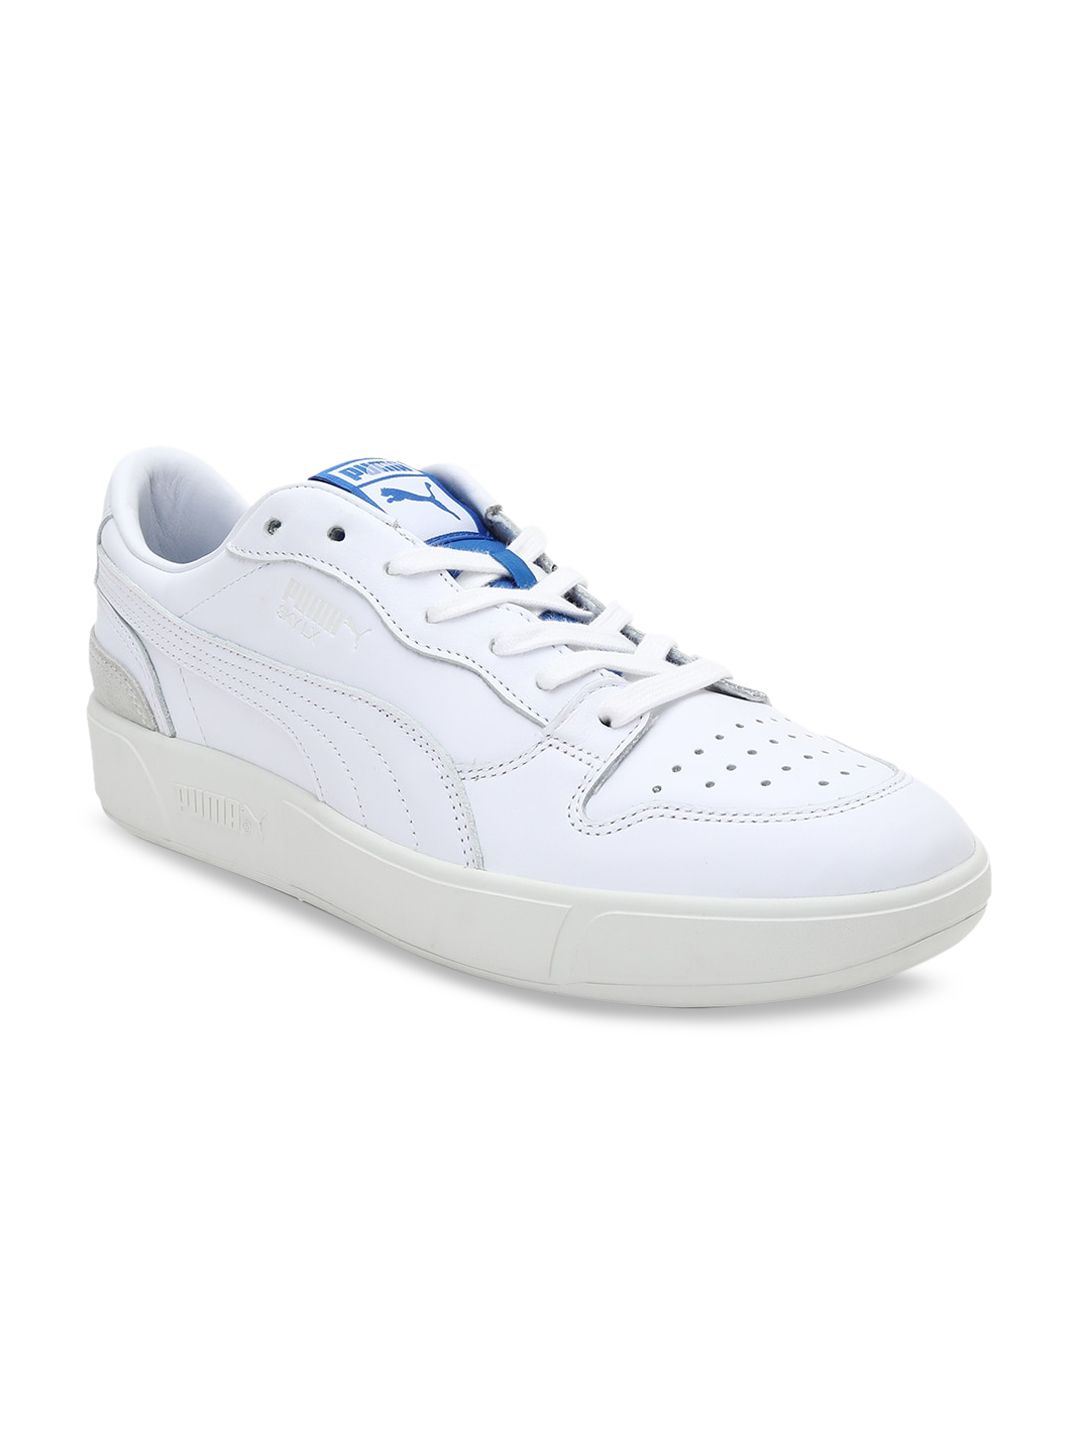 Puma Unisex White Leather Training or Gym Shoes Price in India